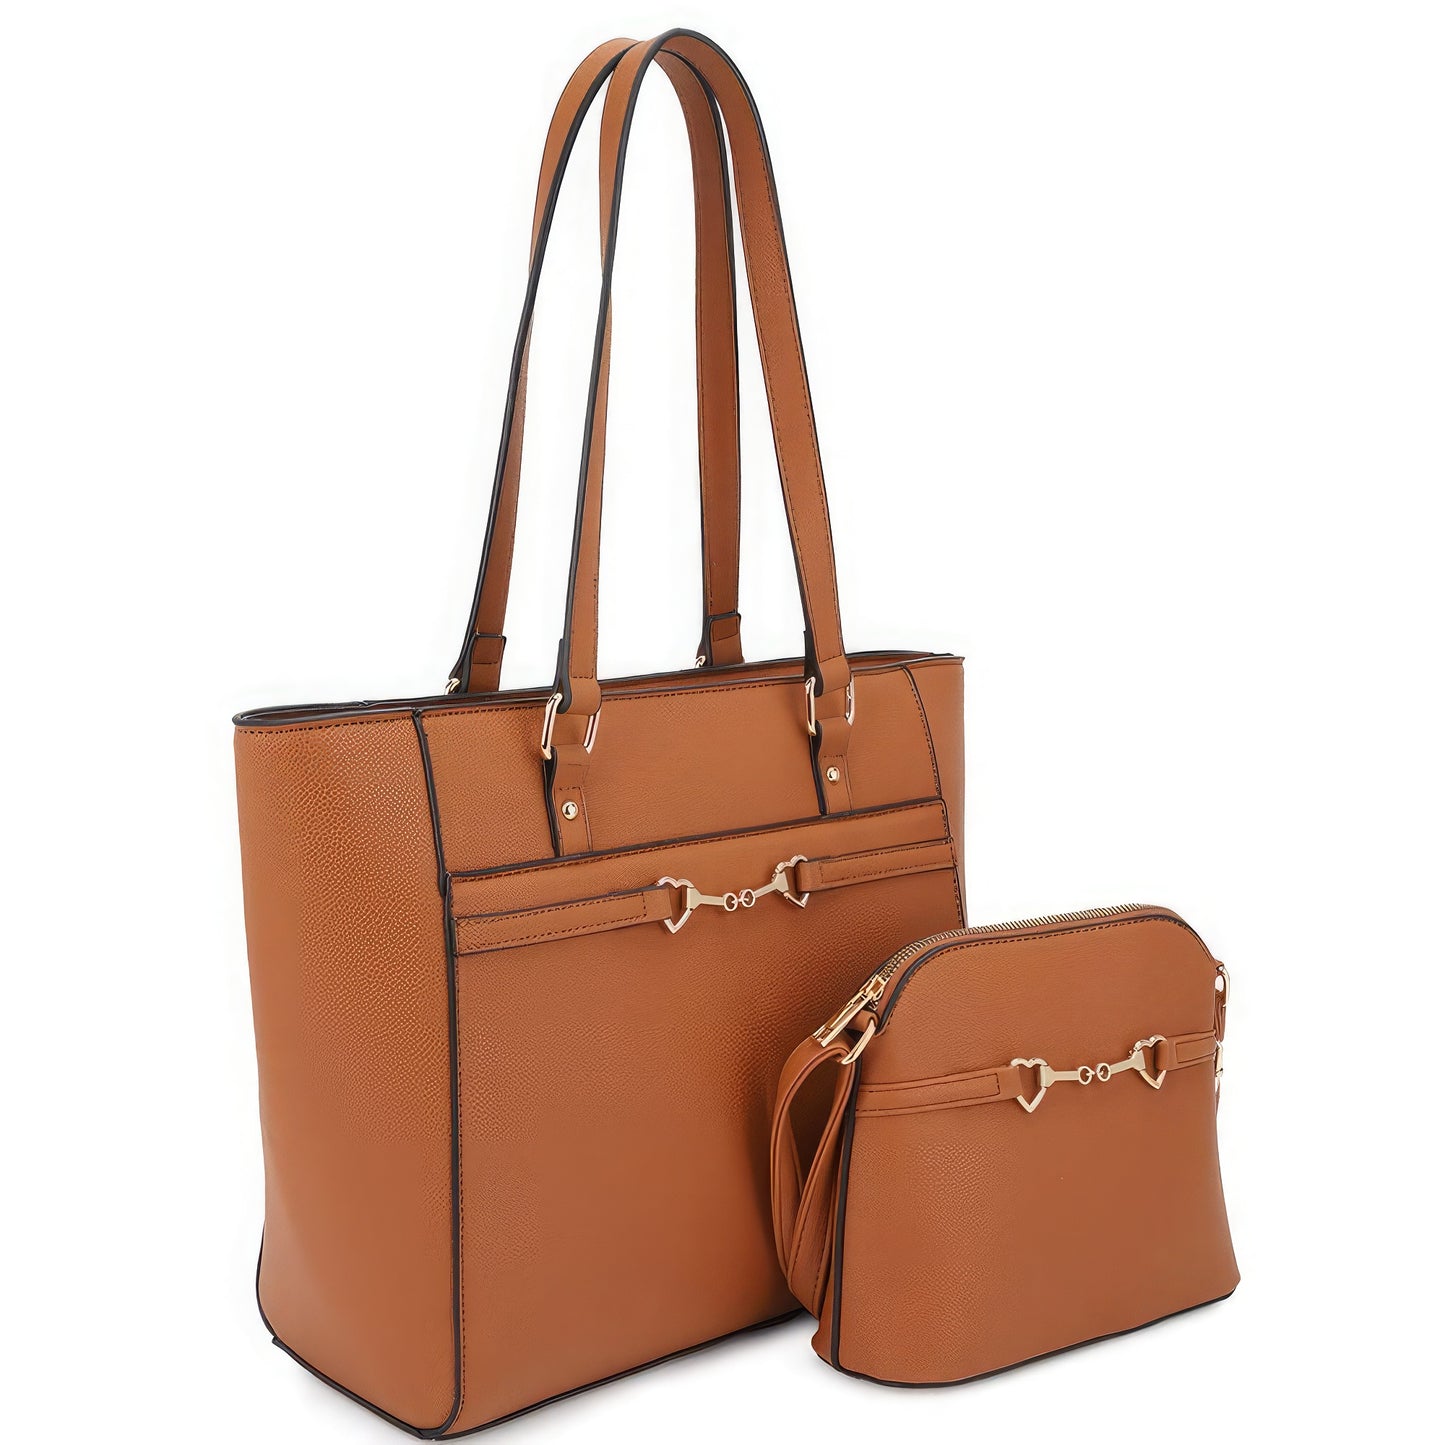 Matching Crossbody and Tote Bag Set (5 Colors)